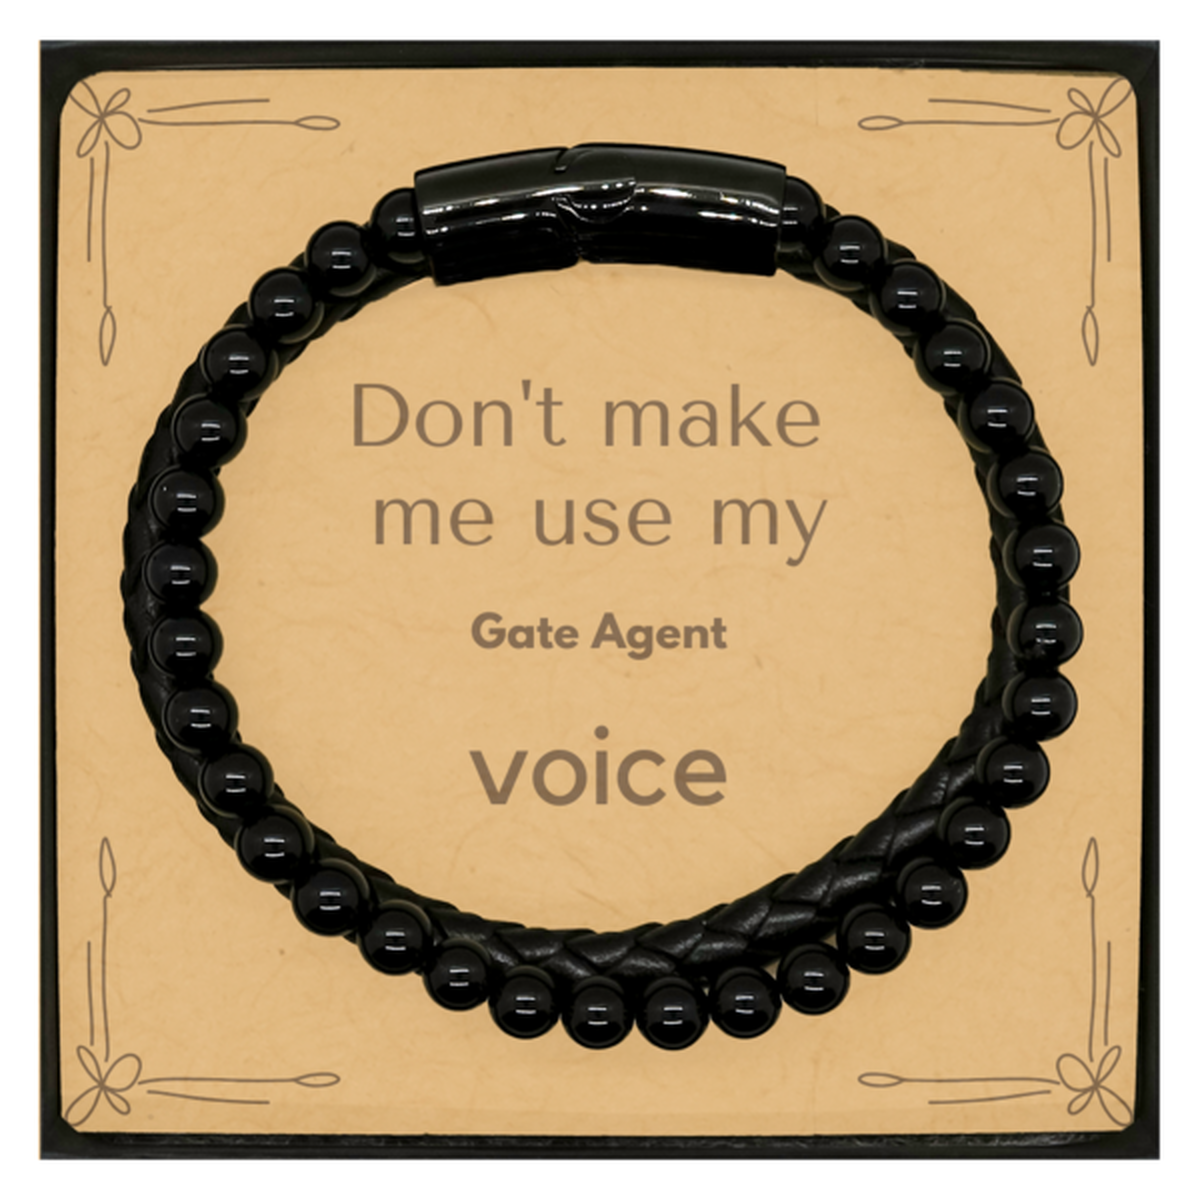 Don't make me use my Gate Agent voice, Sarcasm Gate Agent Card Gifts, Christmas Gate Agent Stone Leather Bracelets Birthday Unique Gifts For Gate Agent Coworkers, Men, Women, Colleague, Friends